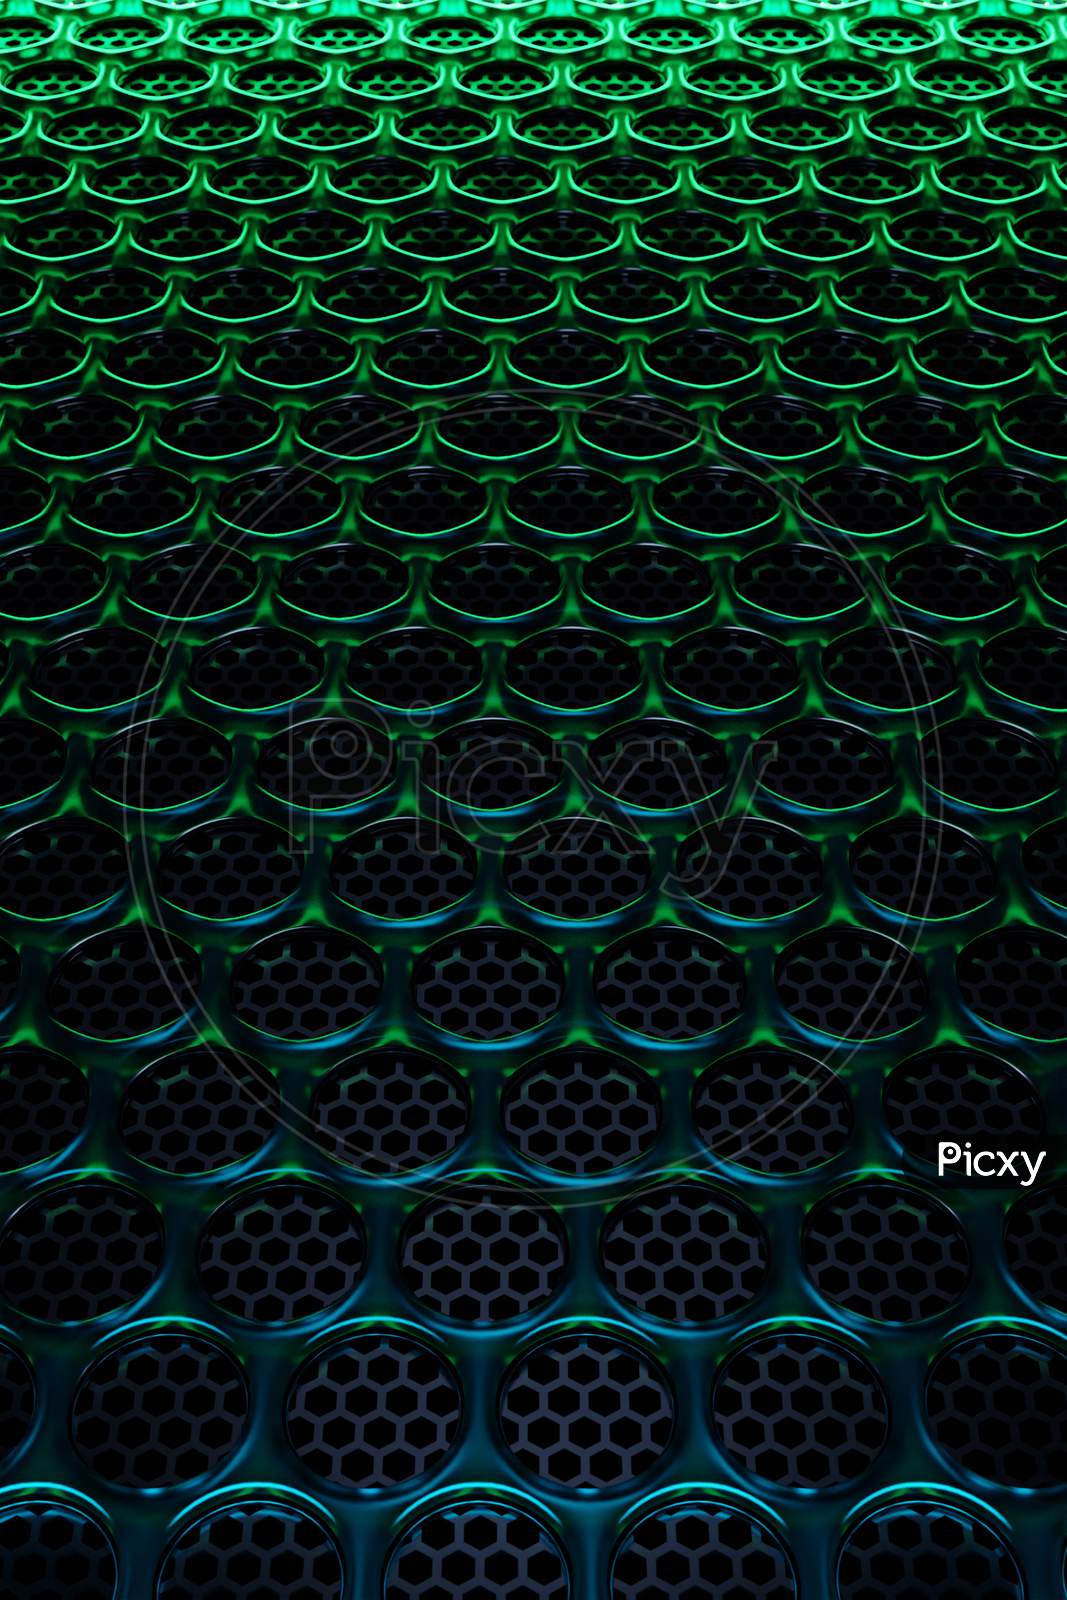 3D Illustration Of Rows Of Black  Circles Under Green  Neon Light .Set Of Circles On Monocrome Dark Background, Pattern. Geometry  Background